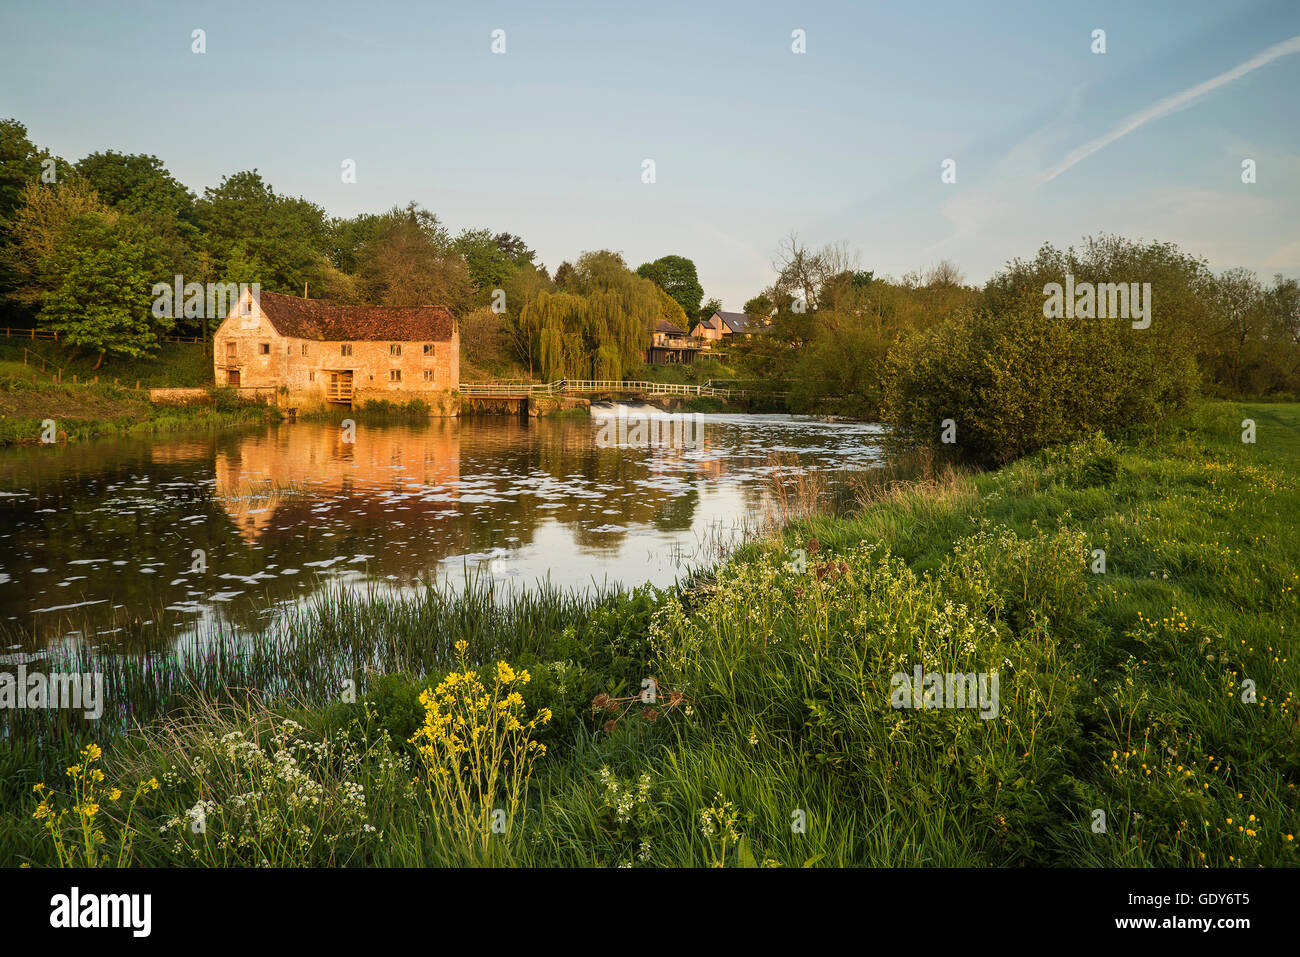 Early morning landscape across River to old Mill Stock Photo